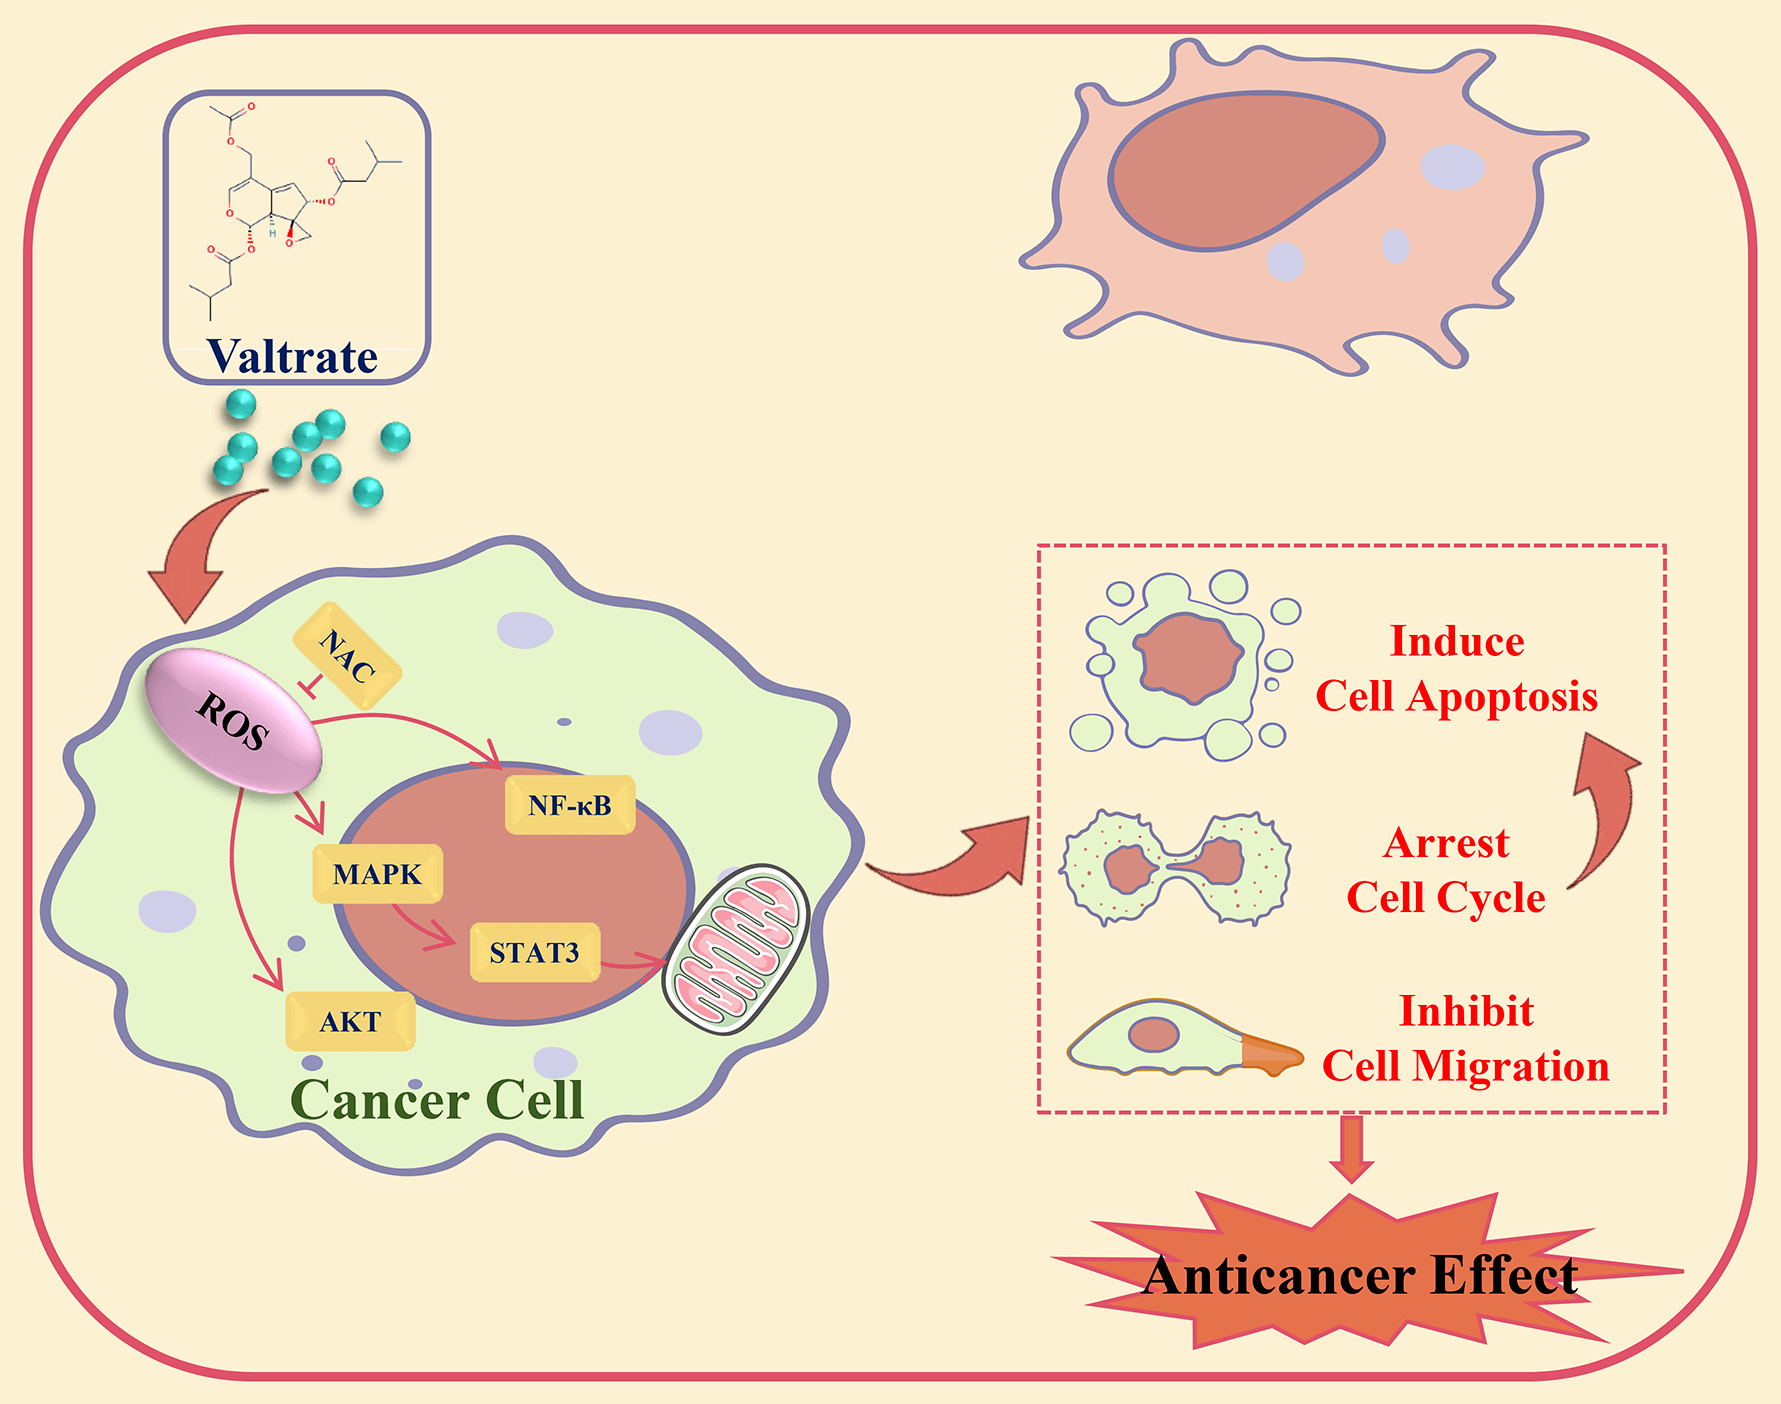 Valtrate exerts anticancer effects on gastric cancer AGS cells by regulating reactive oxygen species-mediated signaling pathways